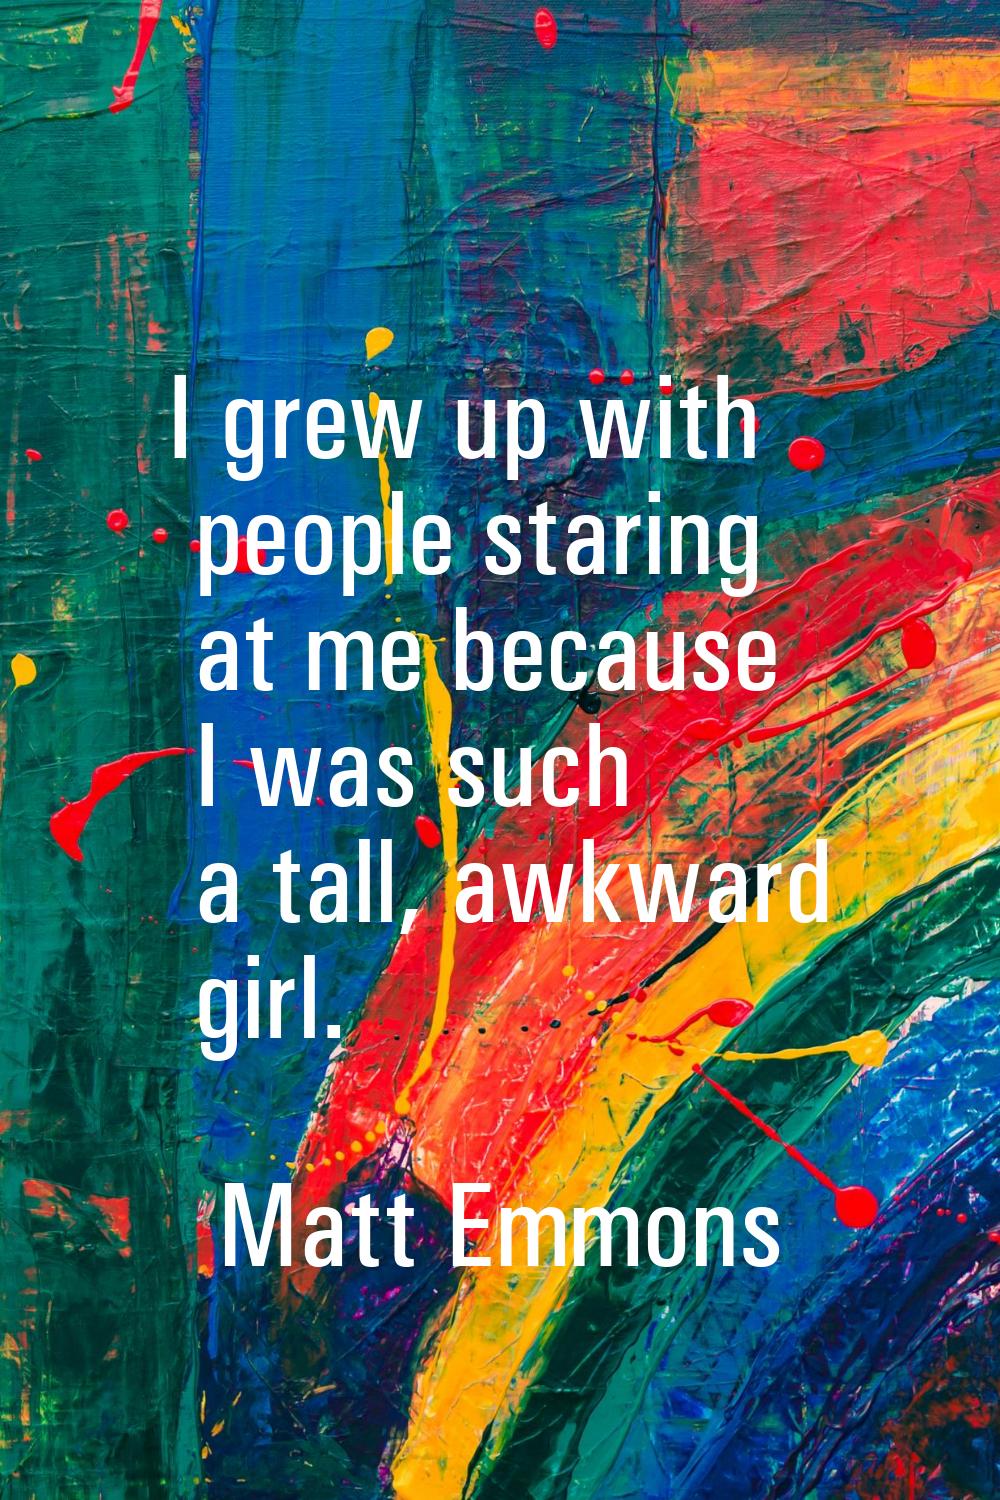 I grew up with people staring at me because I was such a tall, awkward girl.